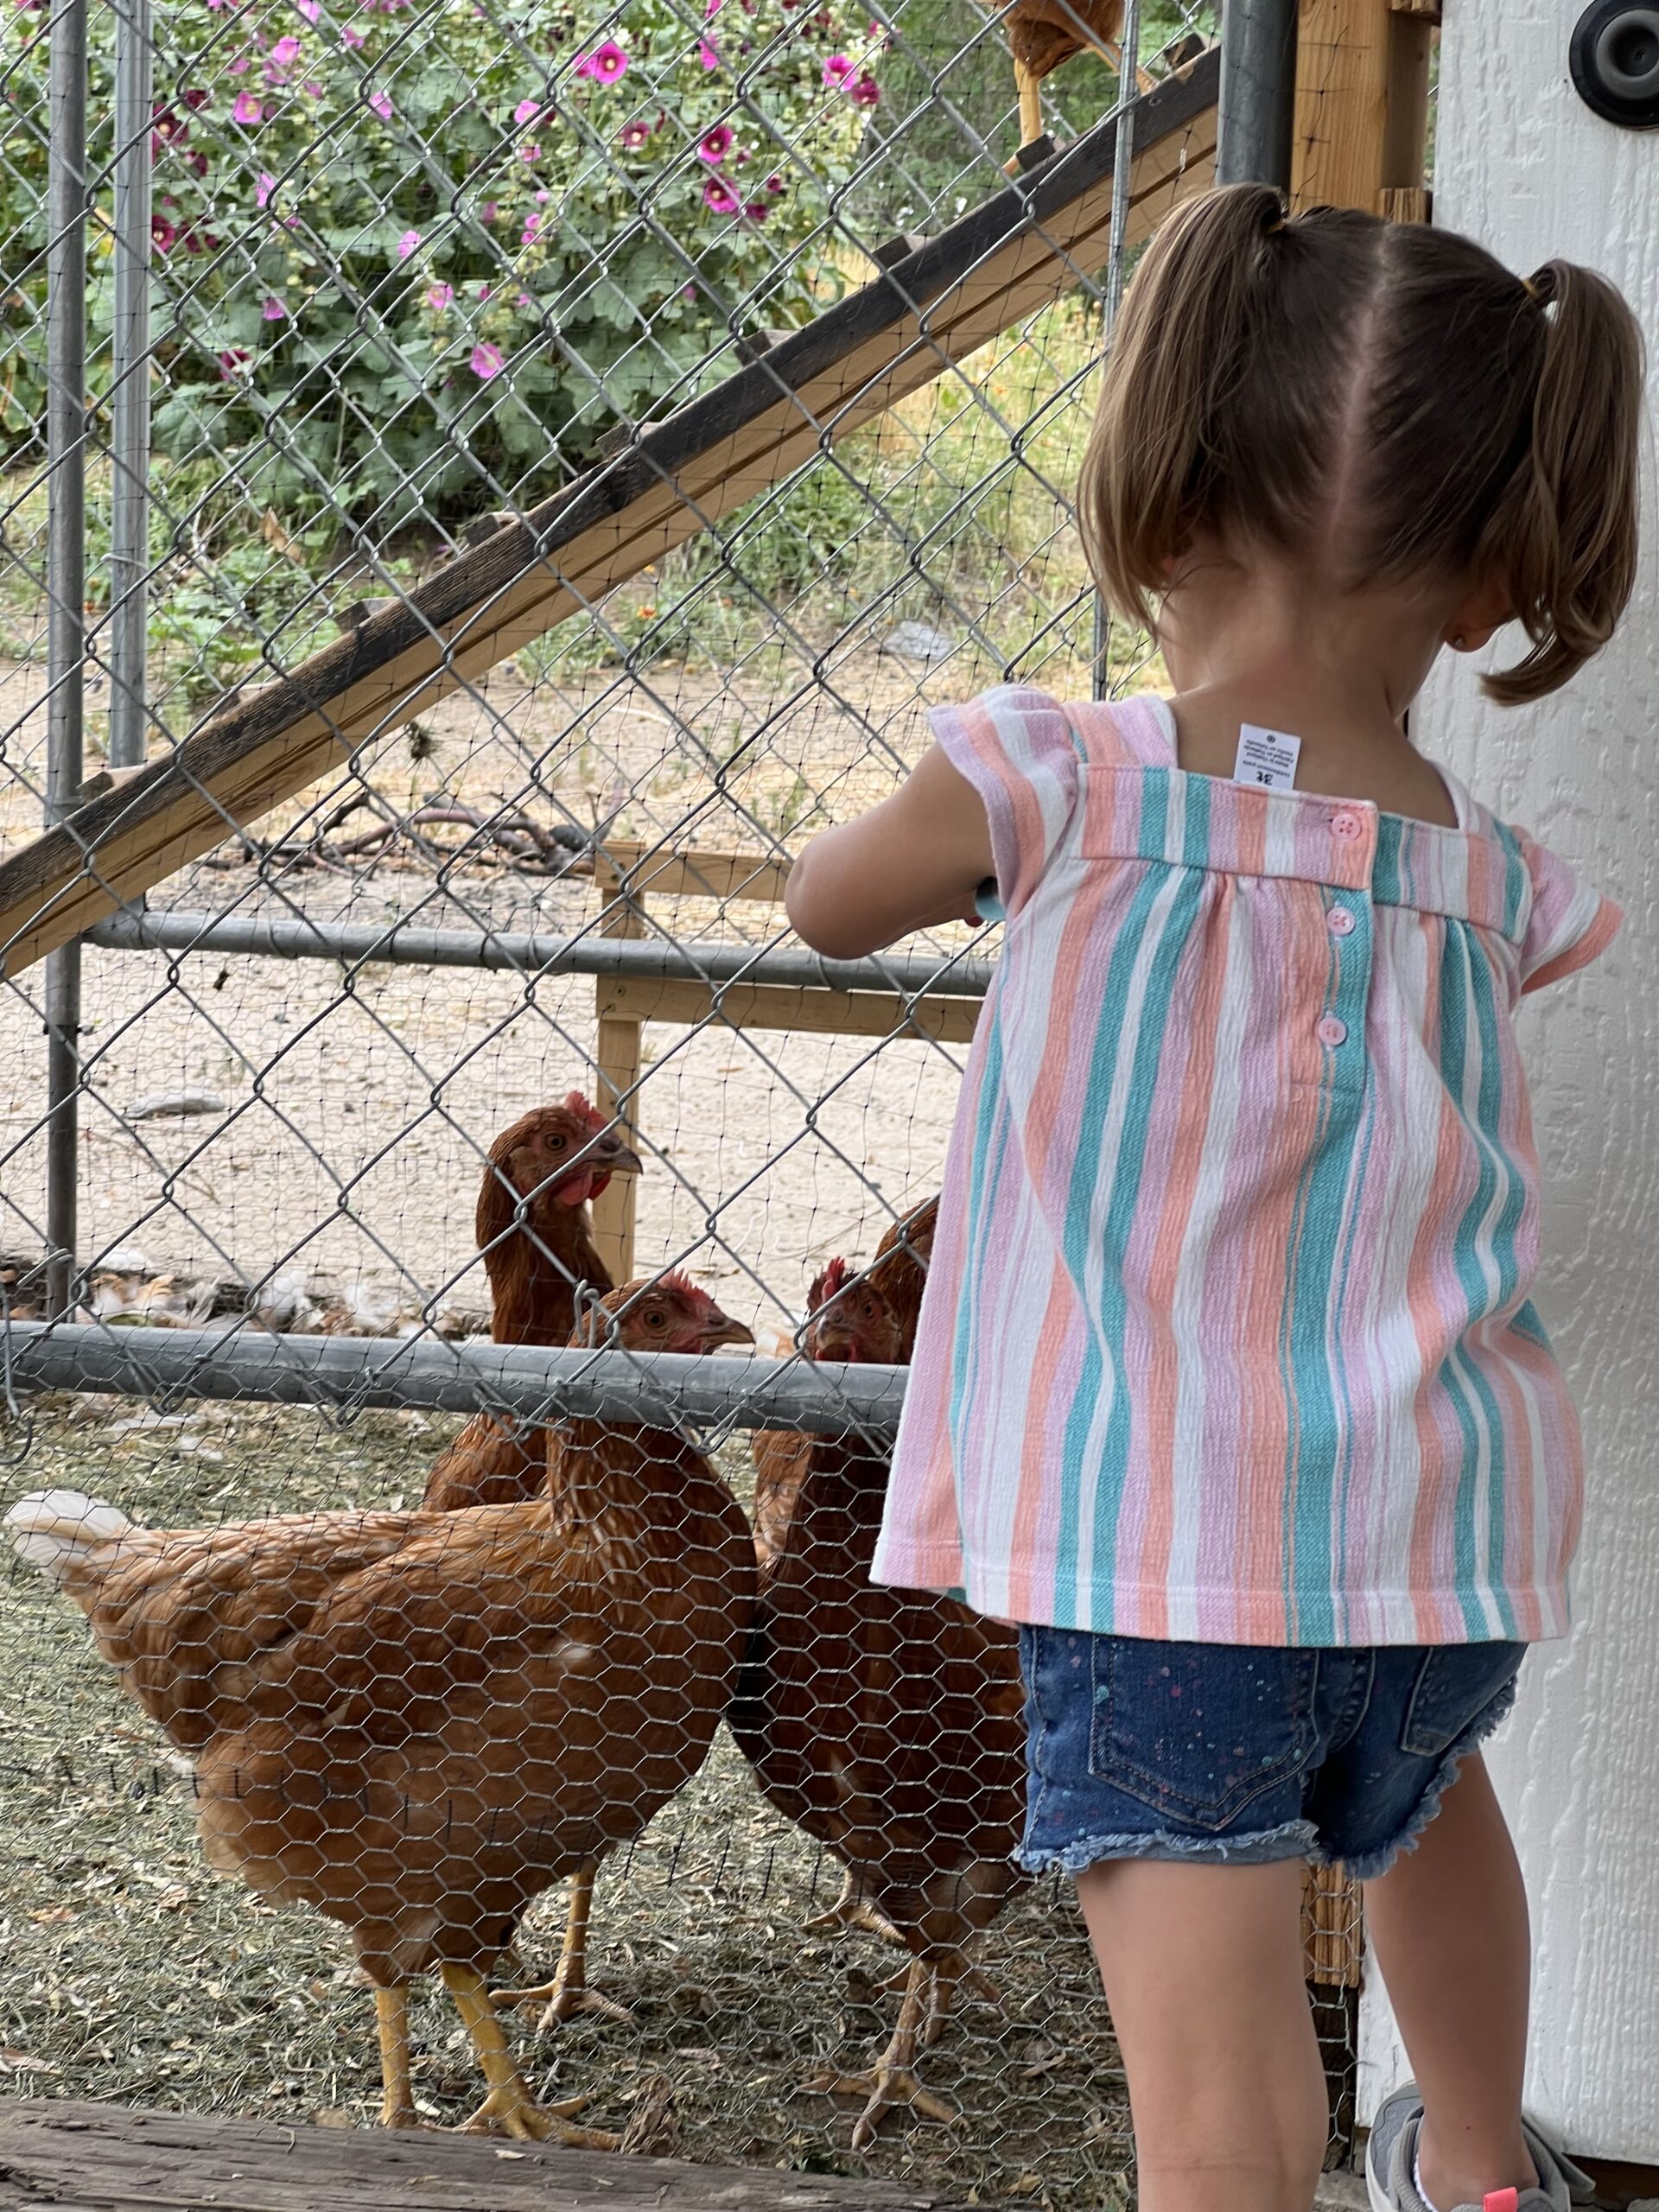 Lessons Our Chickens Have Taught My Children